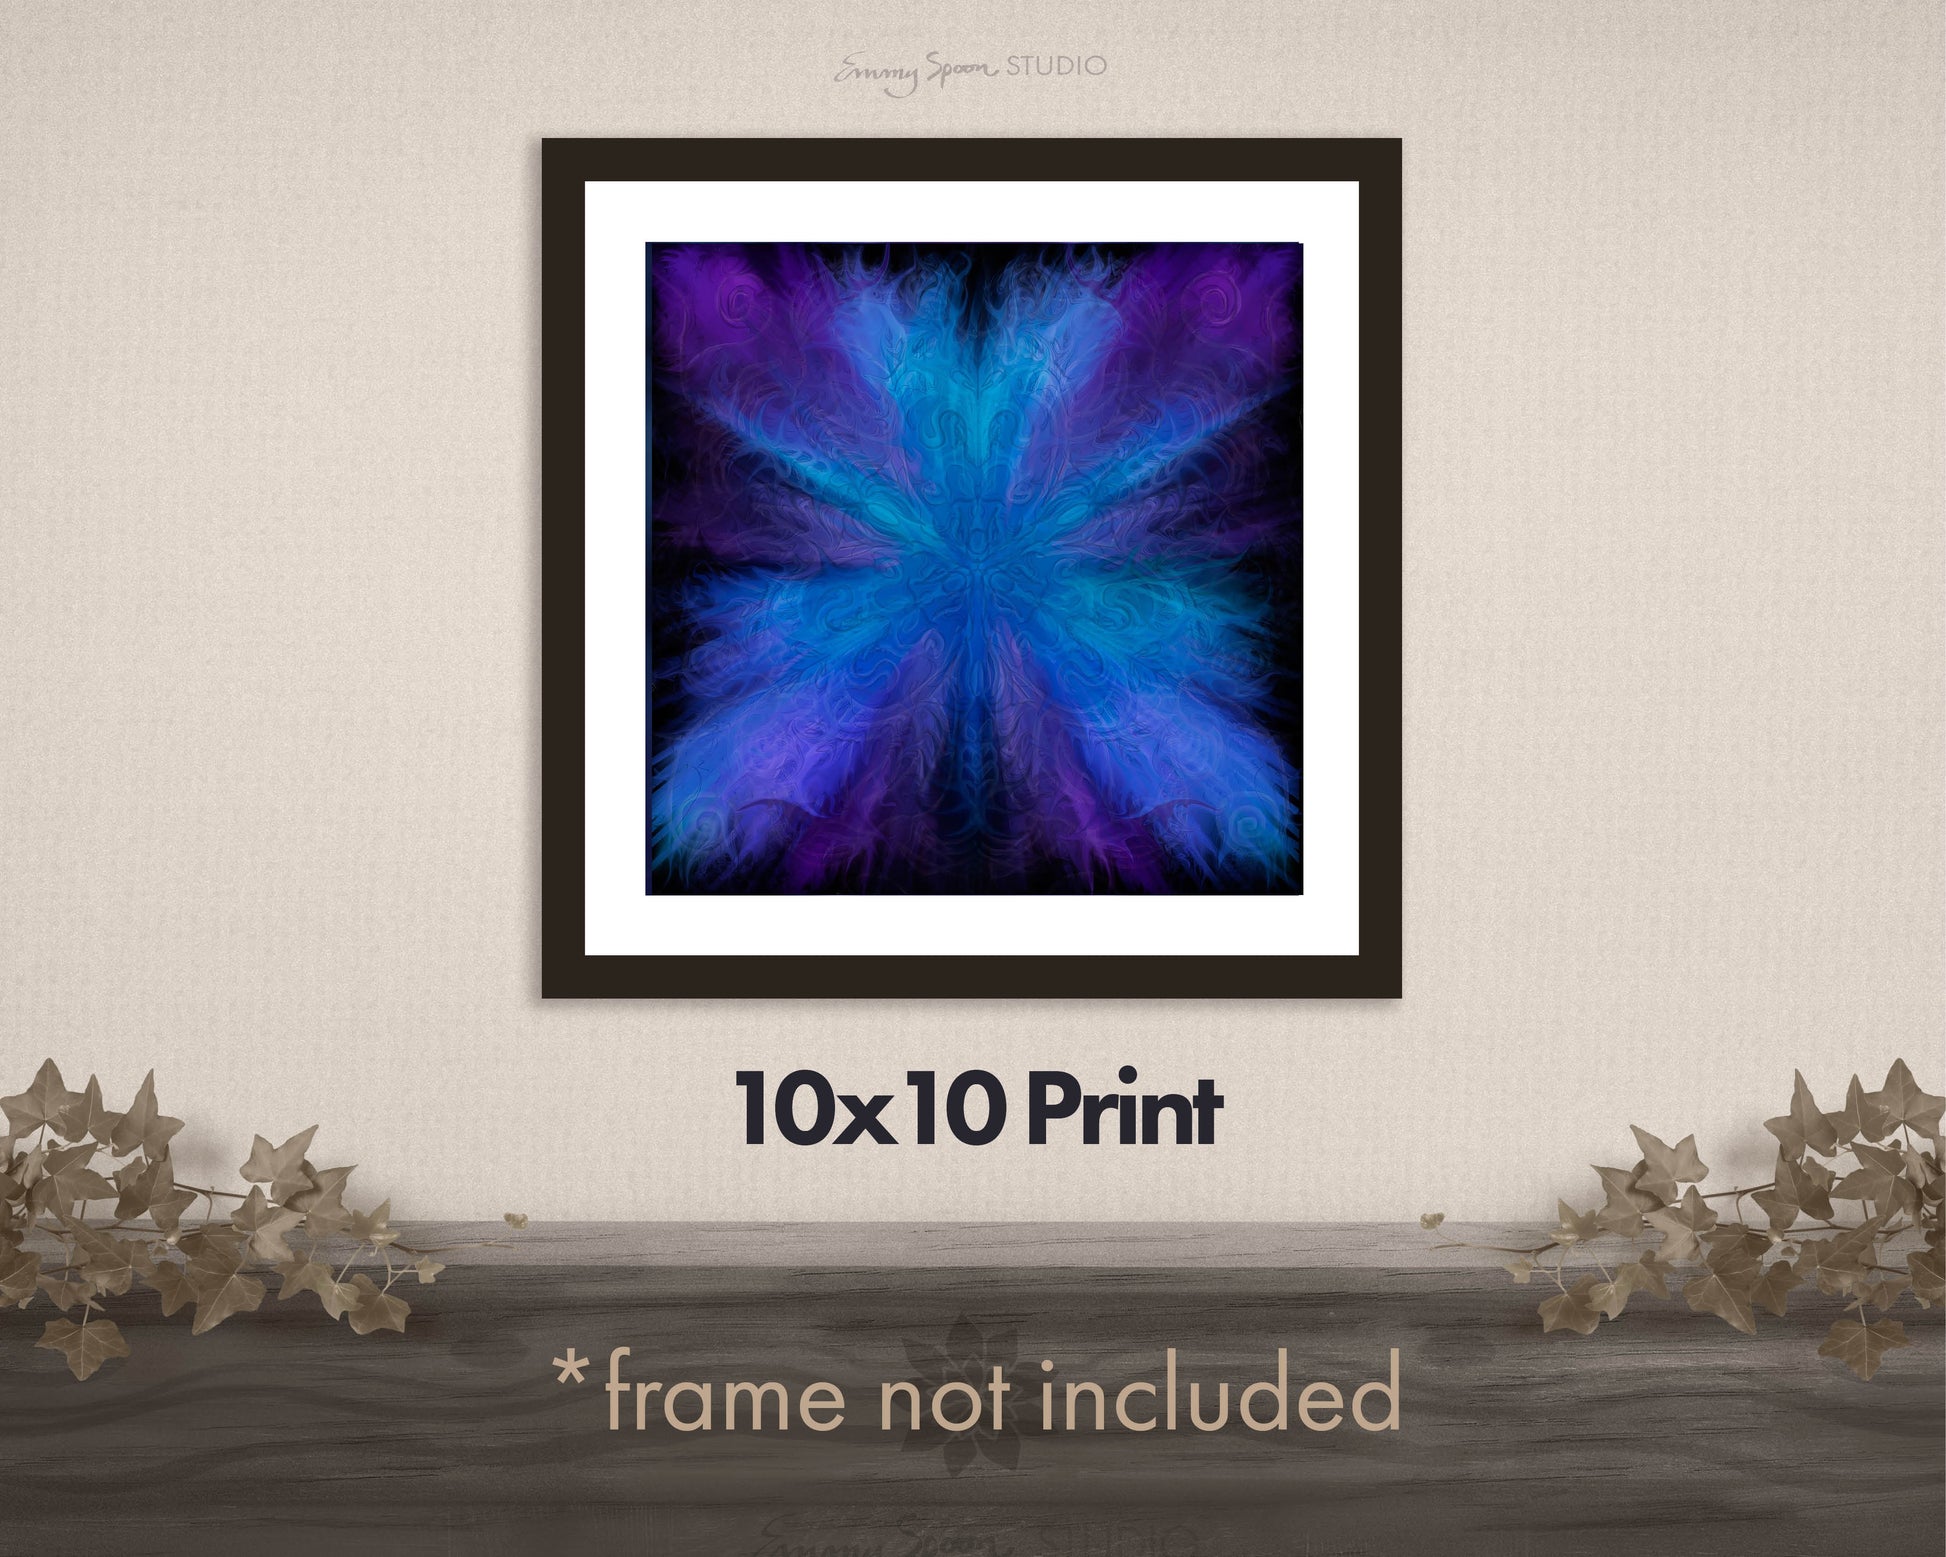 10x10 Lustre Art Print by Emmy Spoon Studio *frame not included